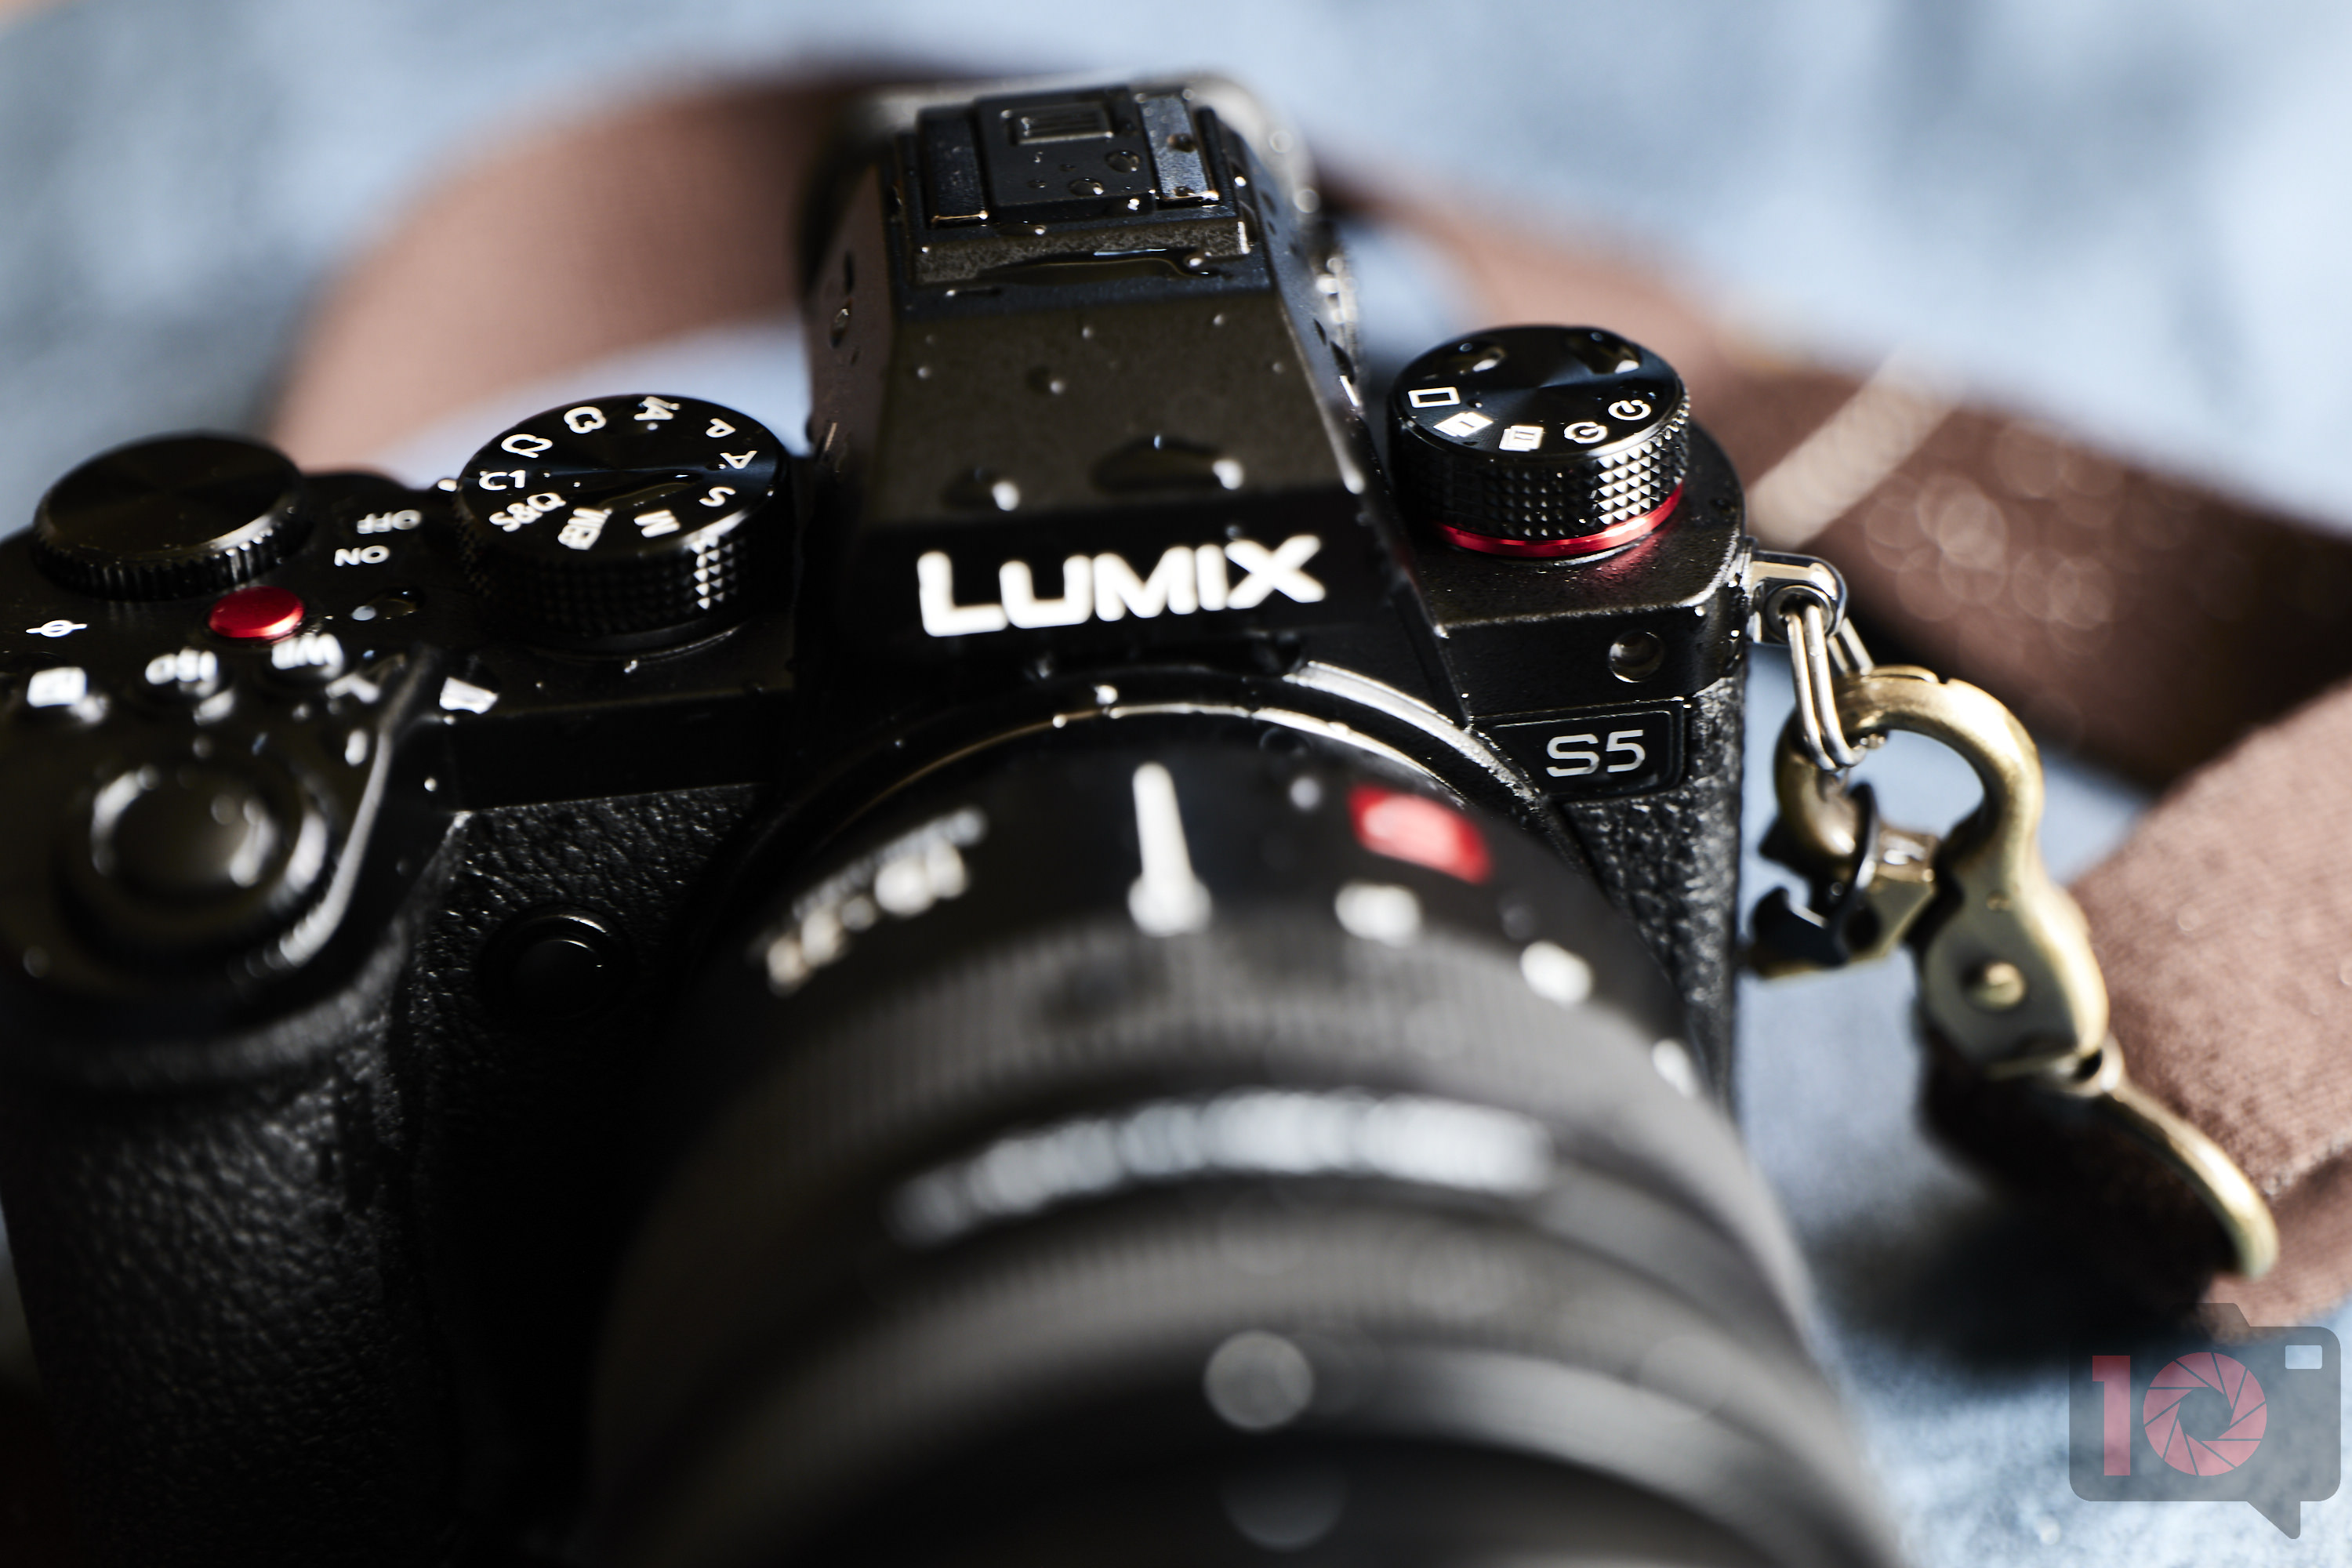 Chris Gampat The Phoblographer Panasonic S5 review product images 2.81-15s400